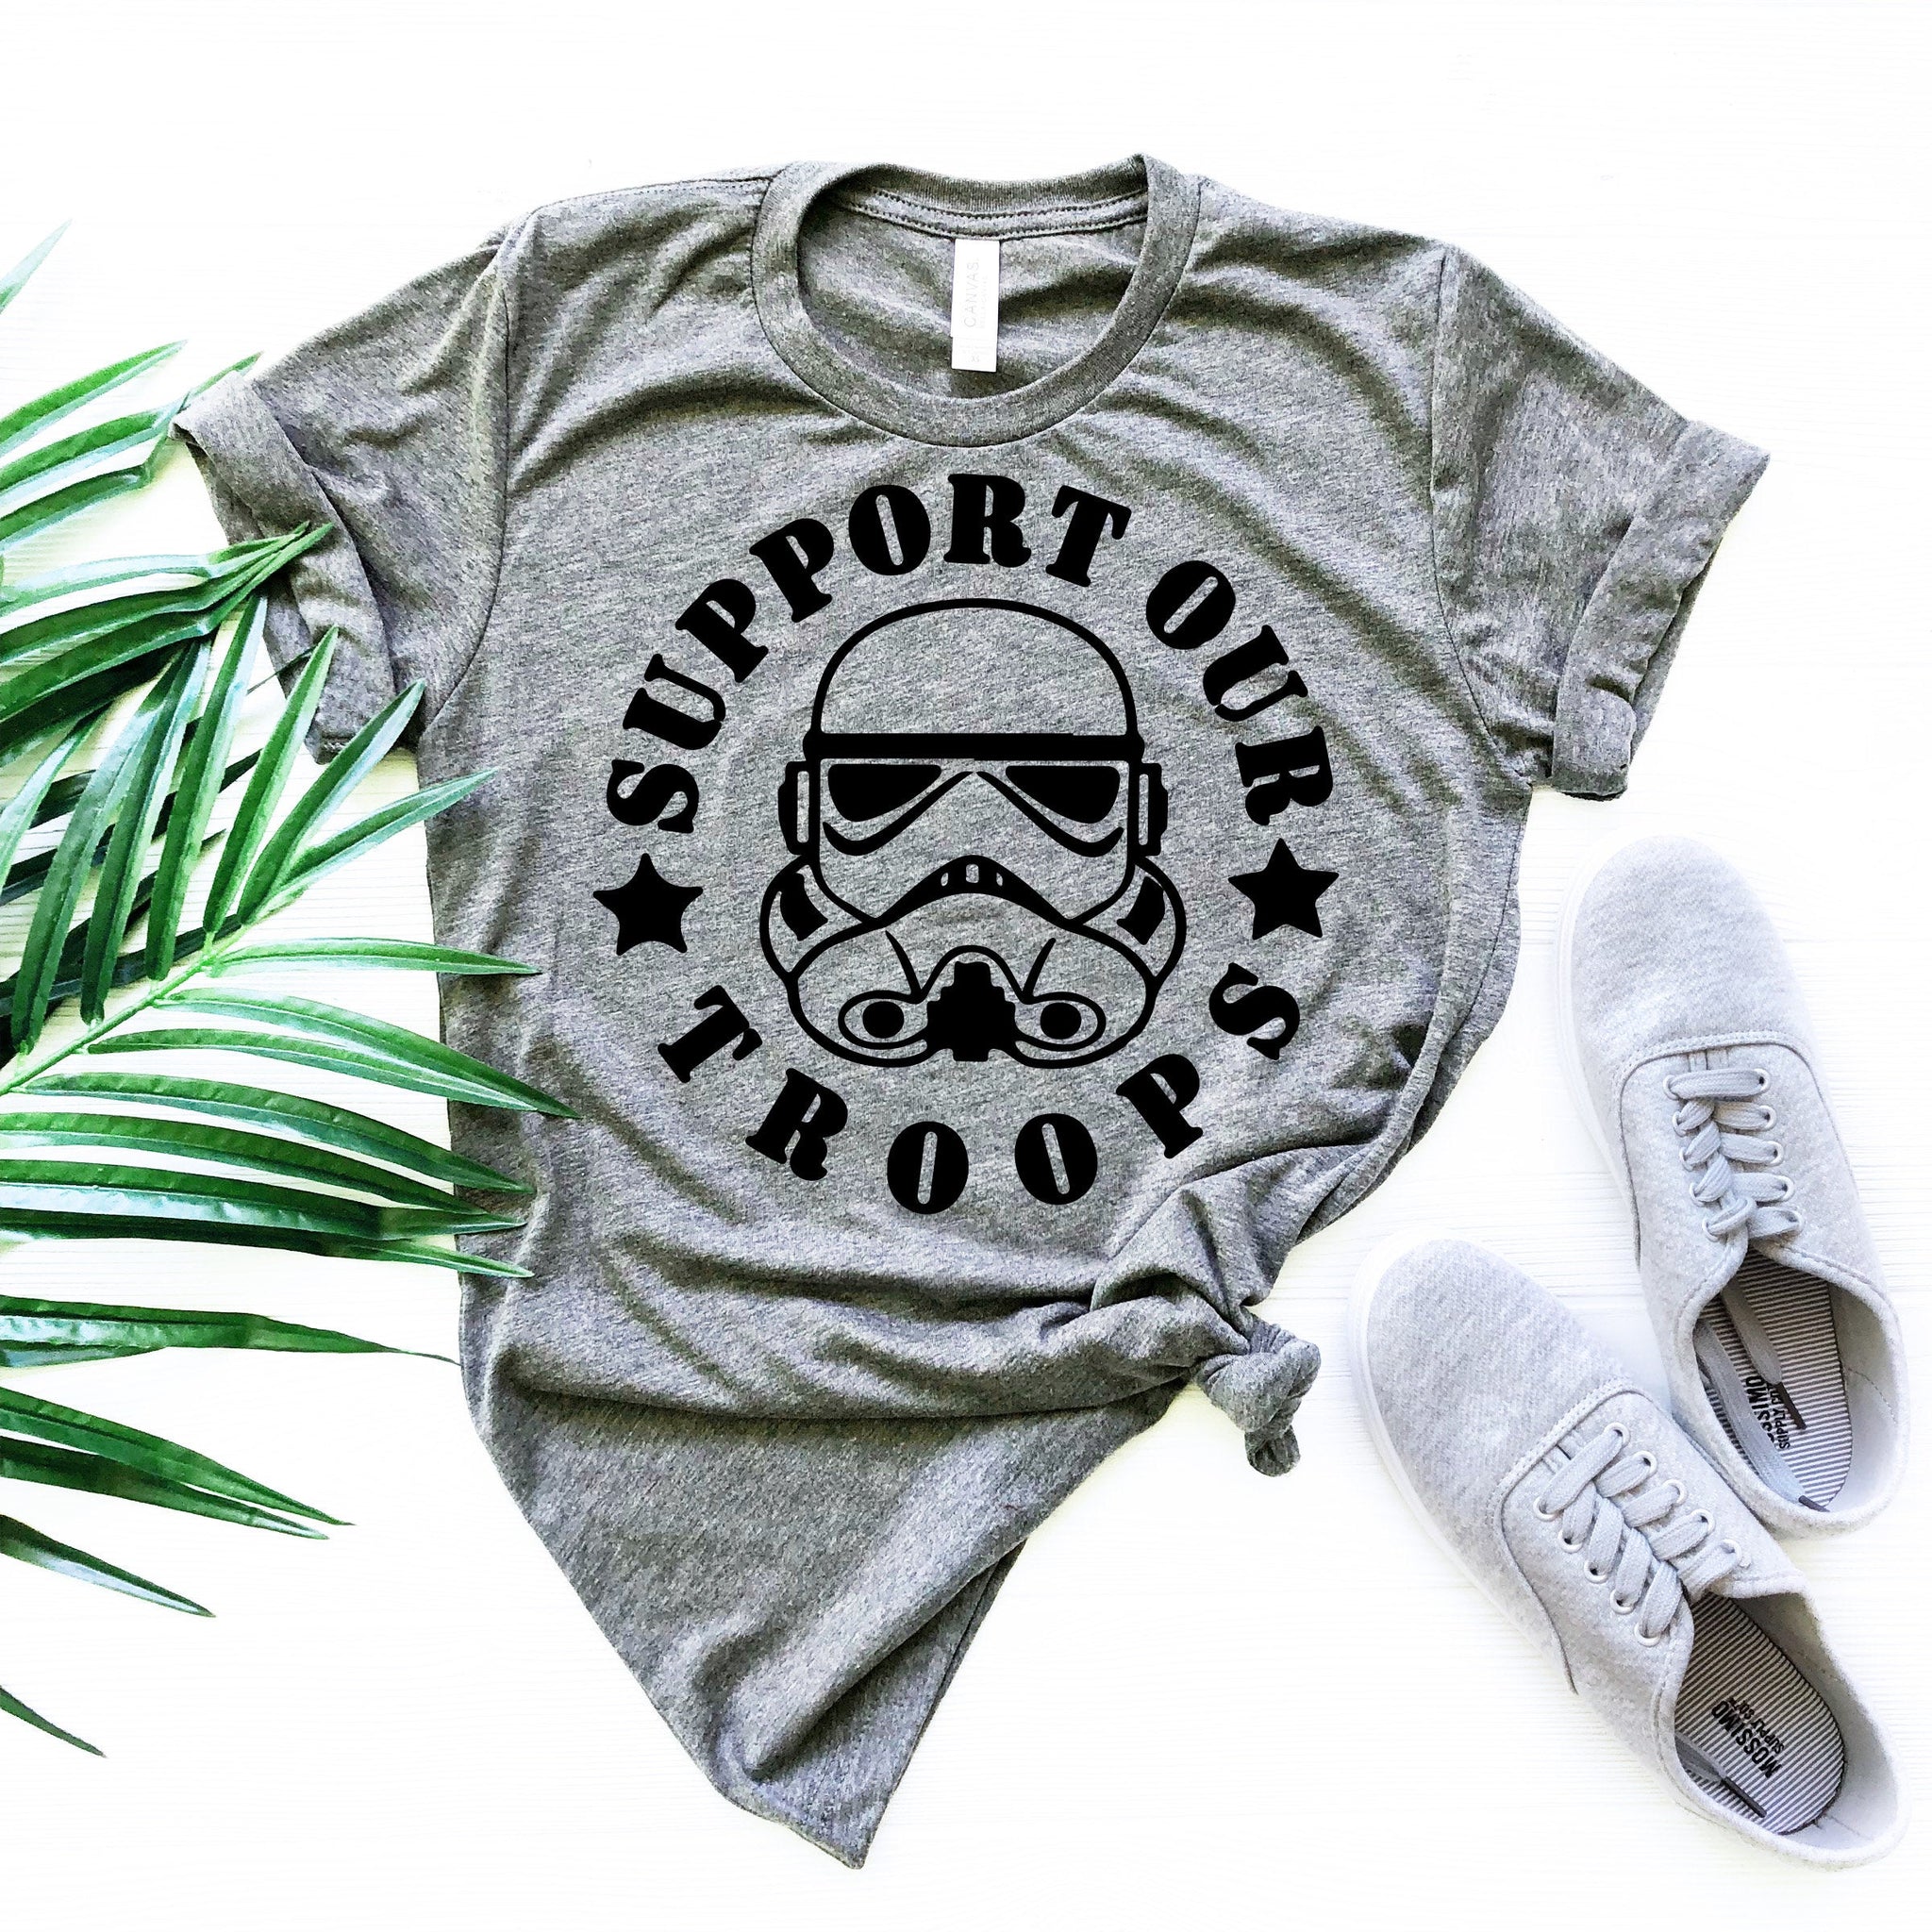 Support Our Troops, Starwars, Funny Shirts, Funny Tshirt, Cute Tshirts, Sarcastic Gifts - Fastdeliverytees.com